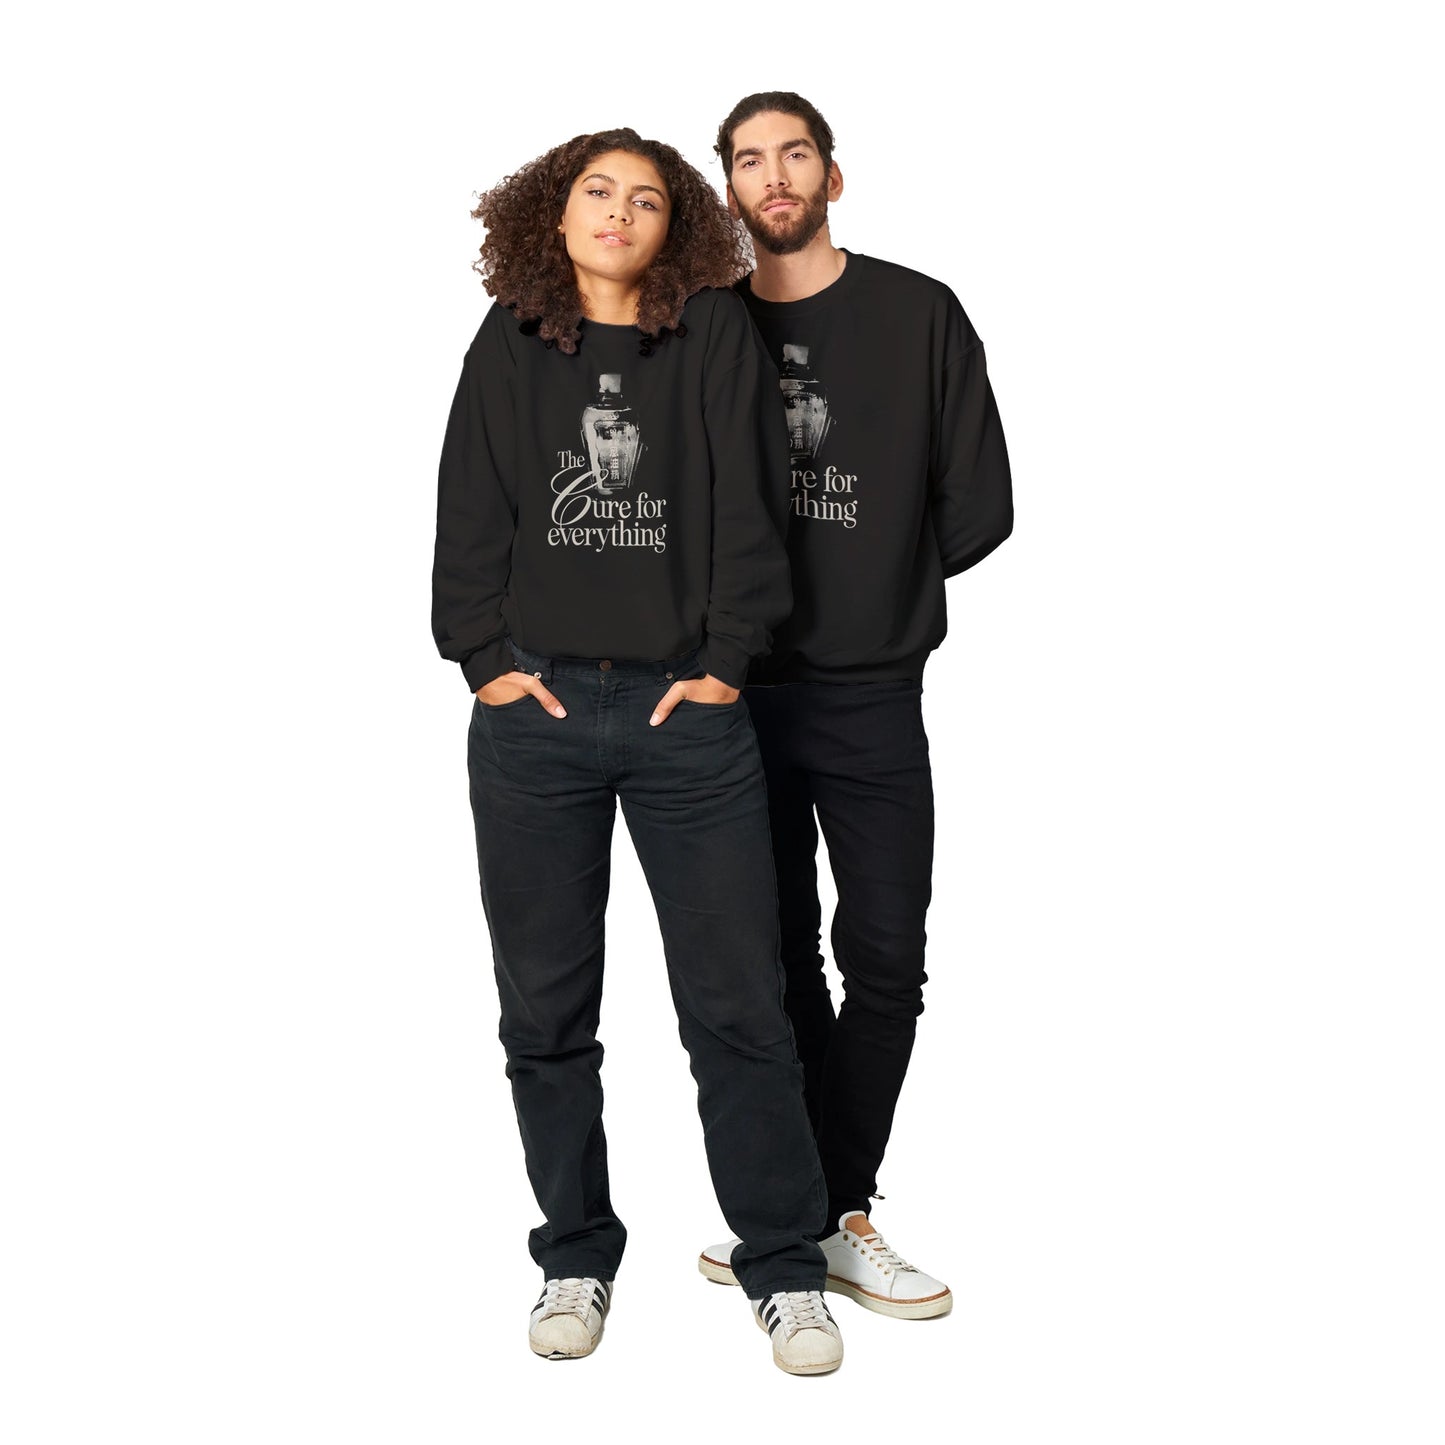 The Cure for Everything Unisex Sweatshirt | Growing Up Asian Series | Eagle Medicated Oil